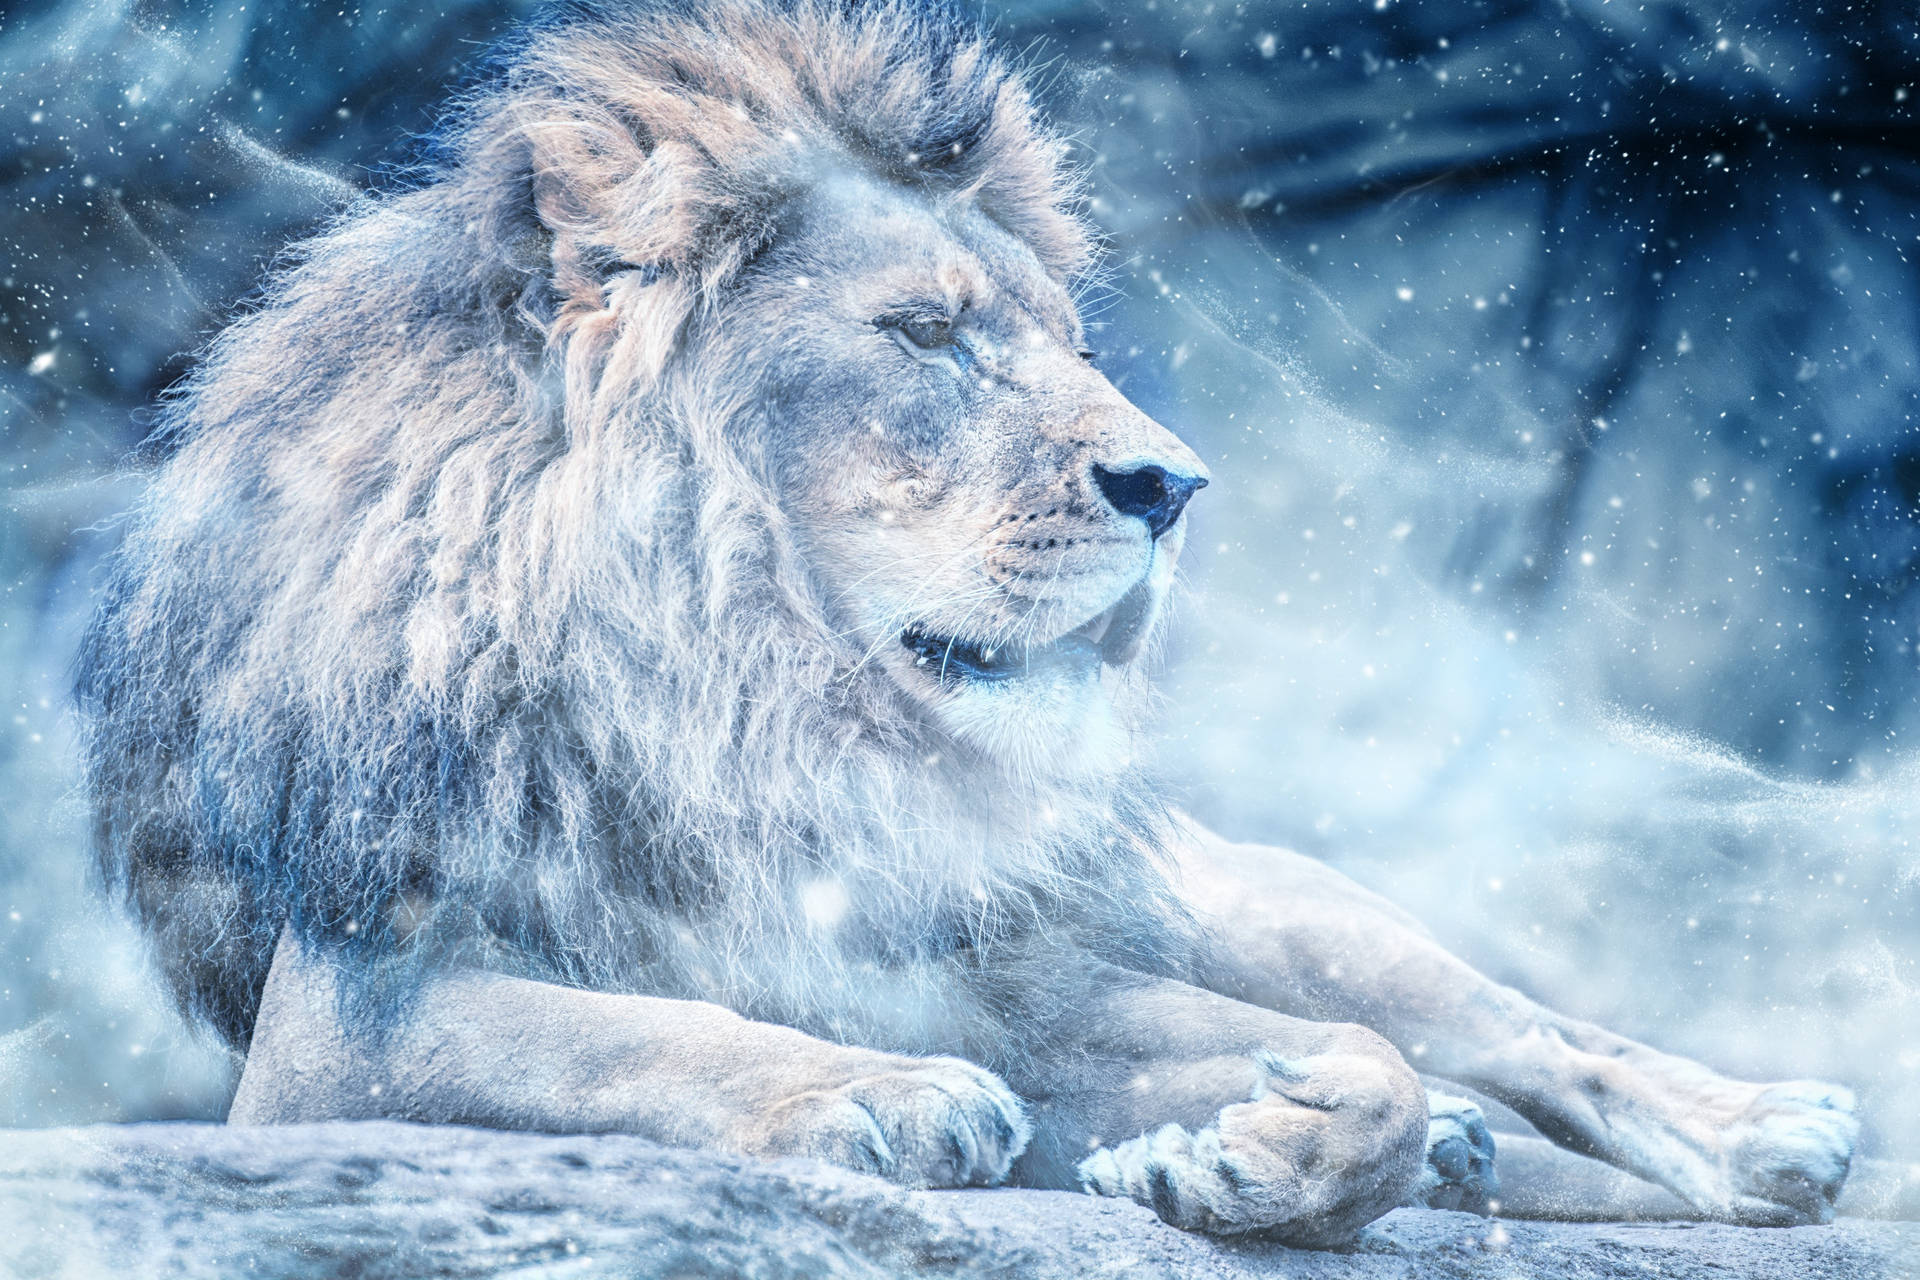 The King of Beasts in His Majestic Winter Domain Wallpaper